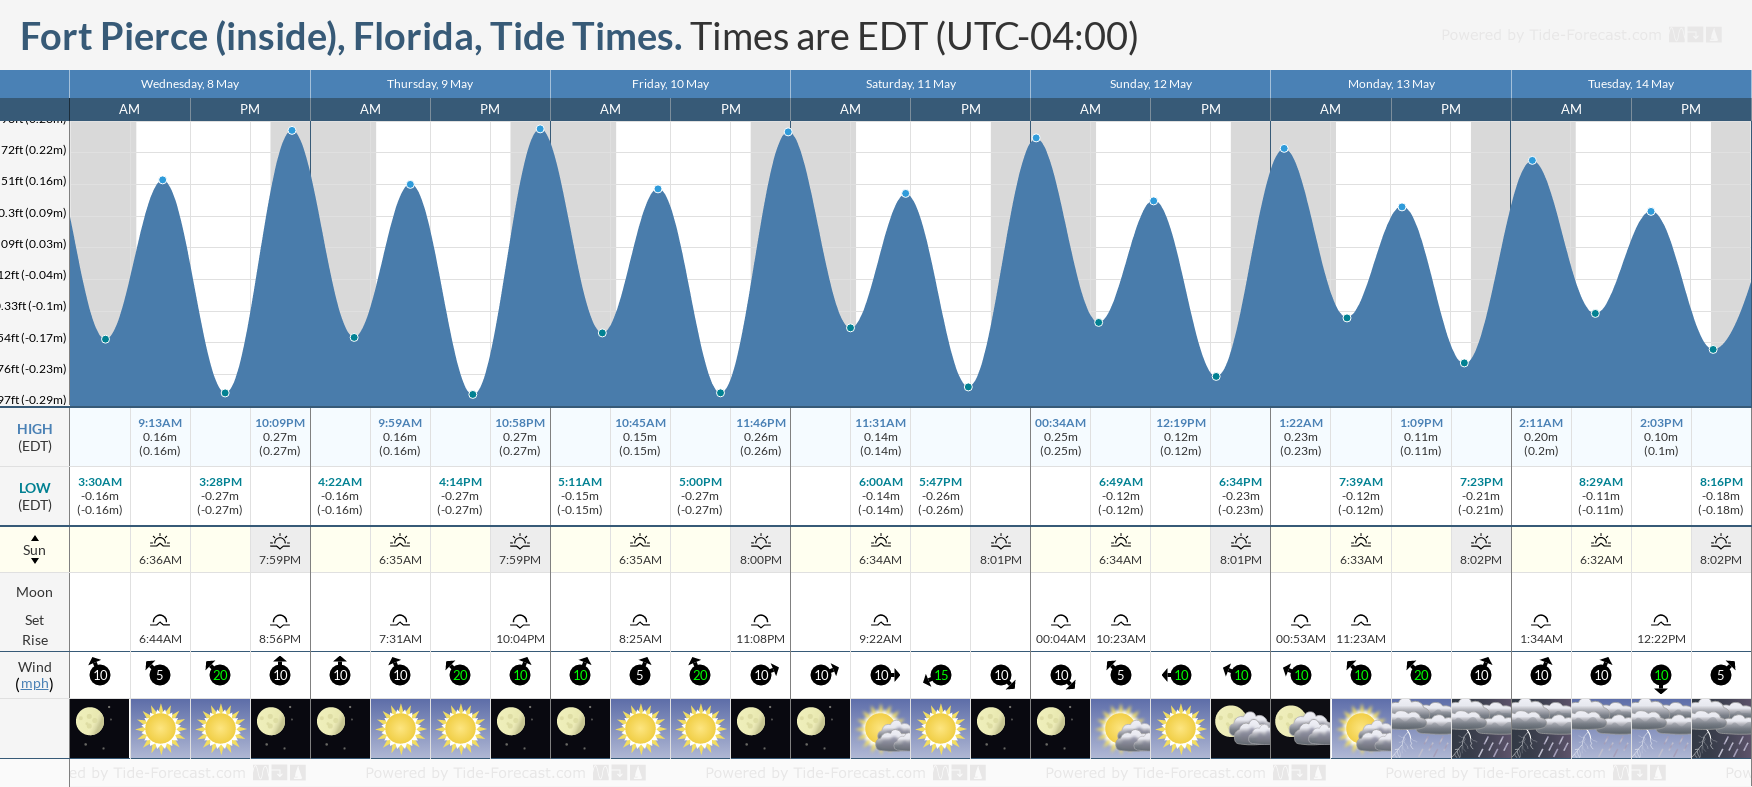 Fort Pierce (inside), Florida Tide Chart including high and low tide tide times for the next 7 days